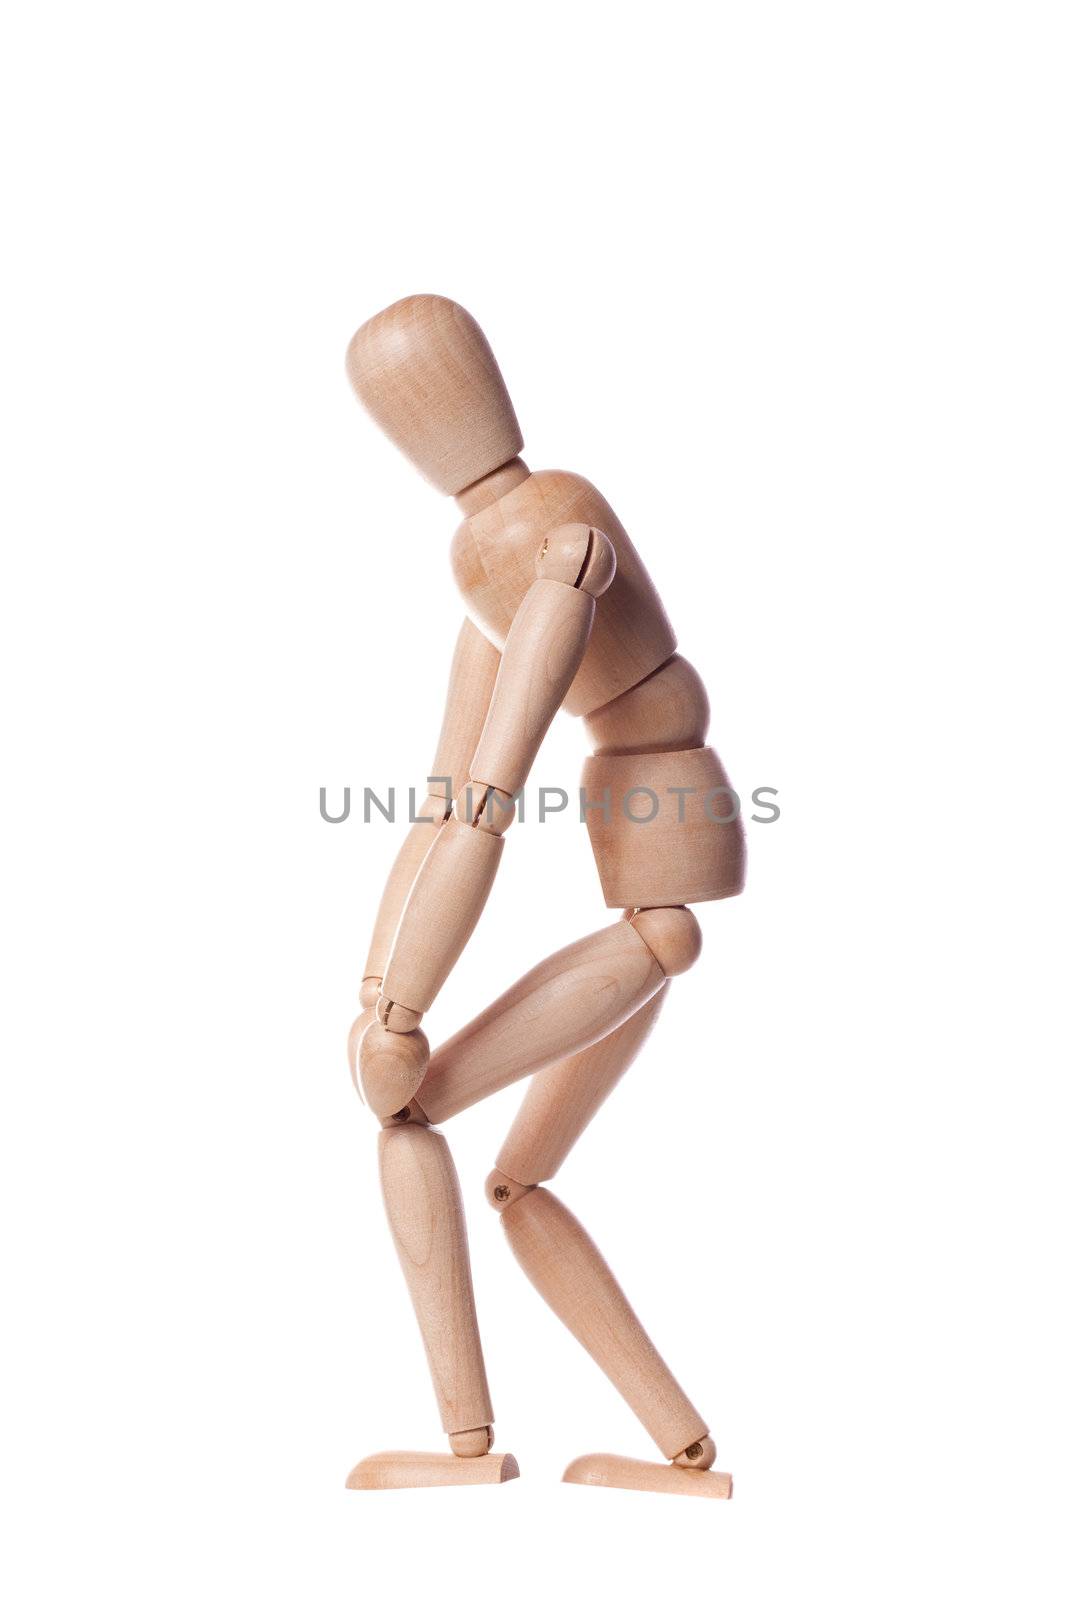 Wooden puppet with knee pain